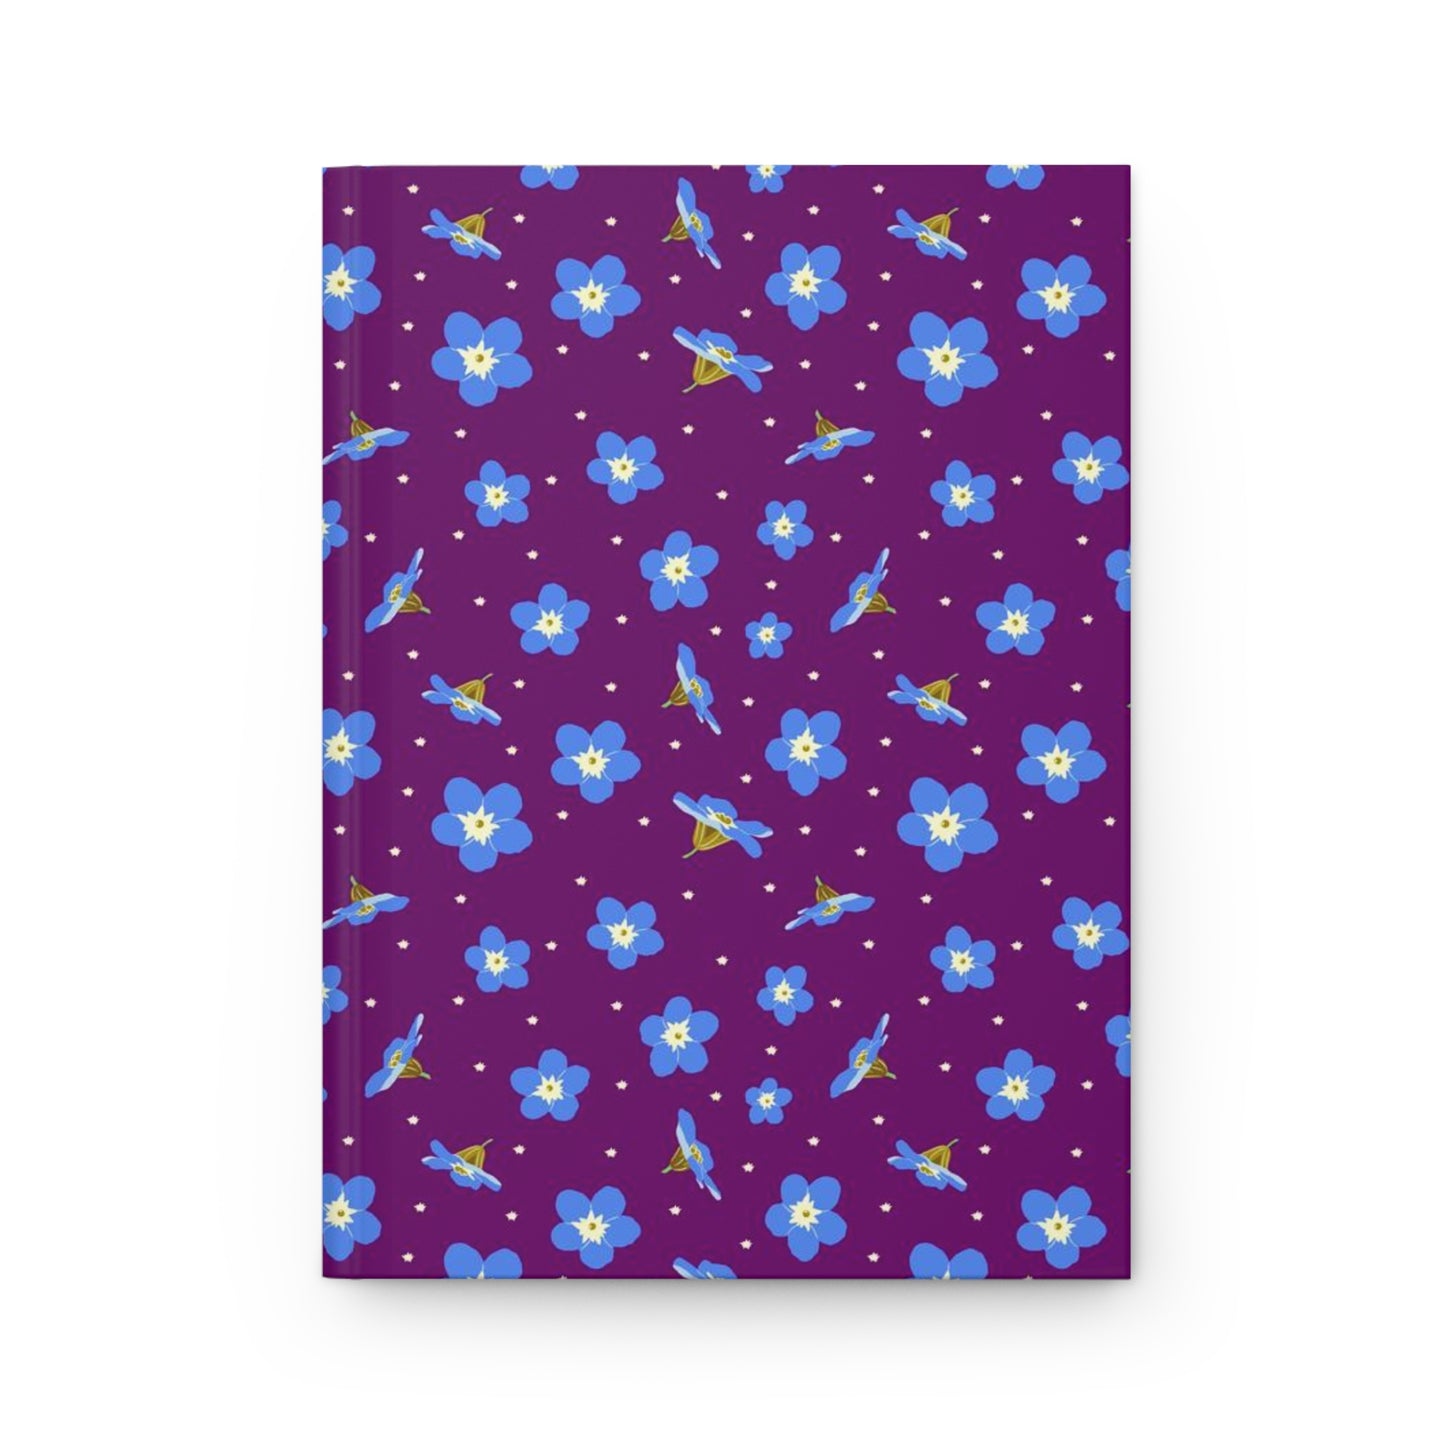 Forget Me Not Flowers Hardcover Journal Matte